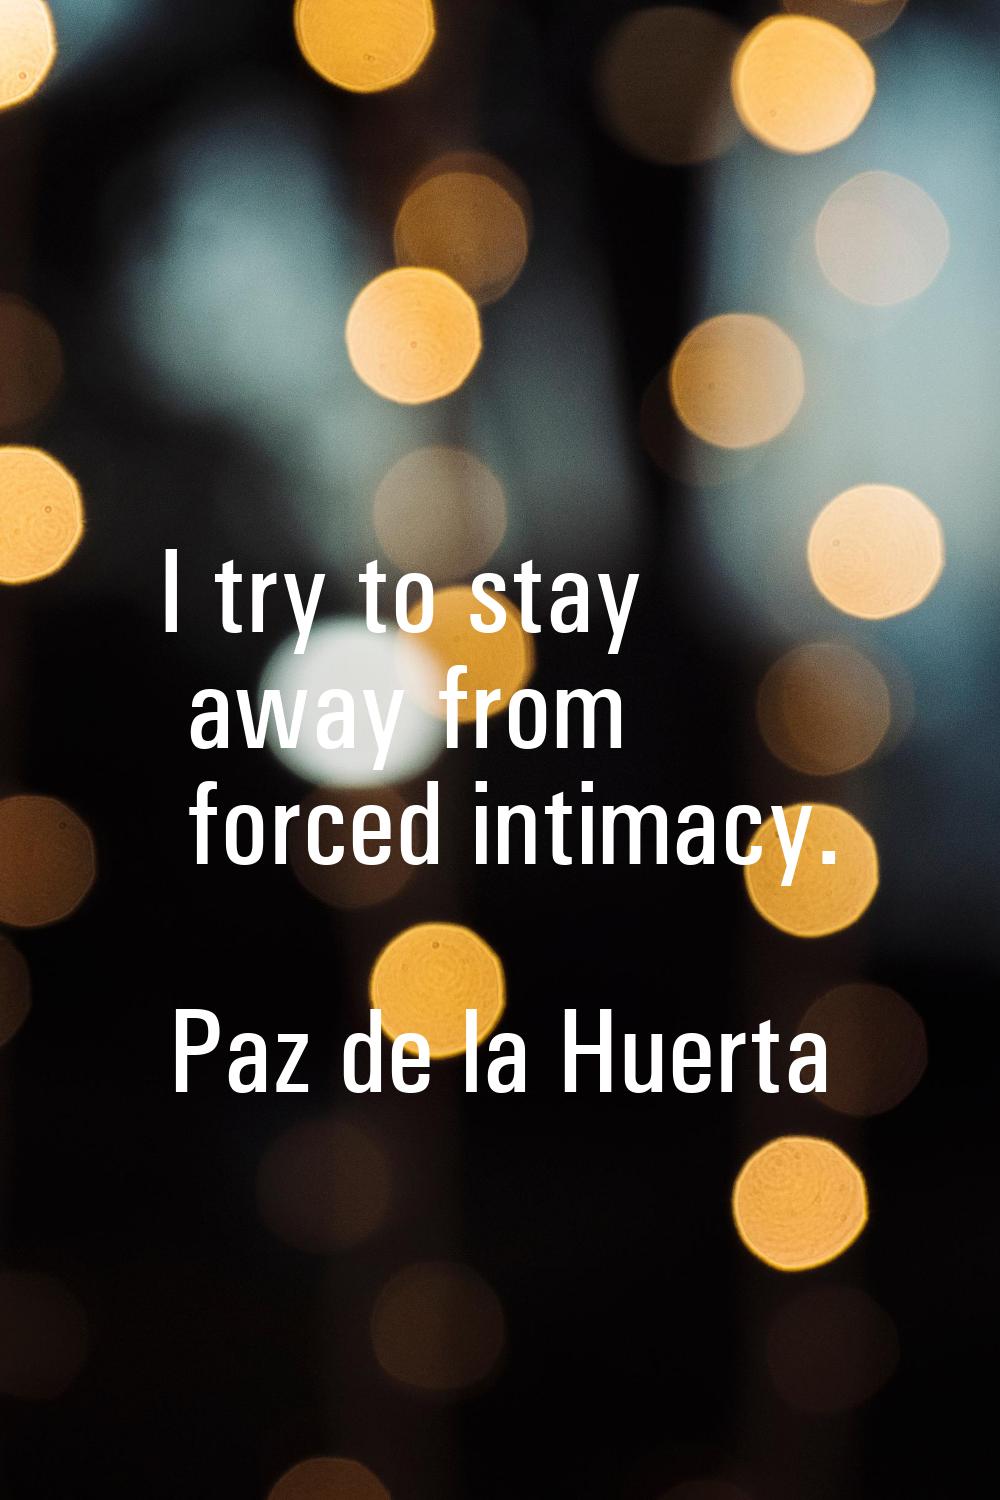 I try to stay away from forced intimacy.